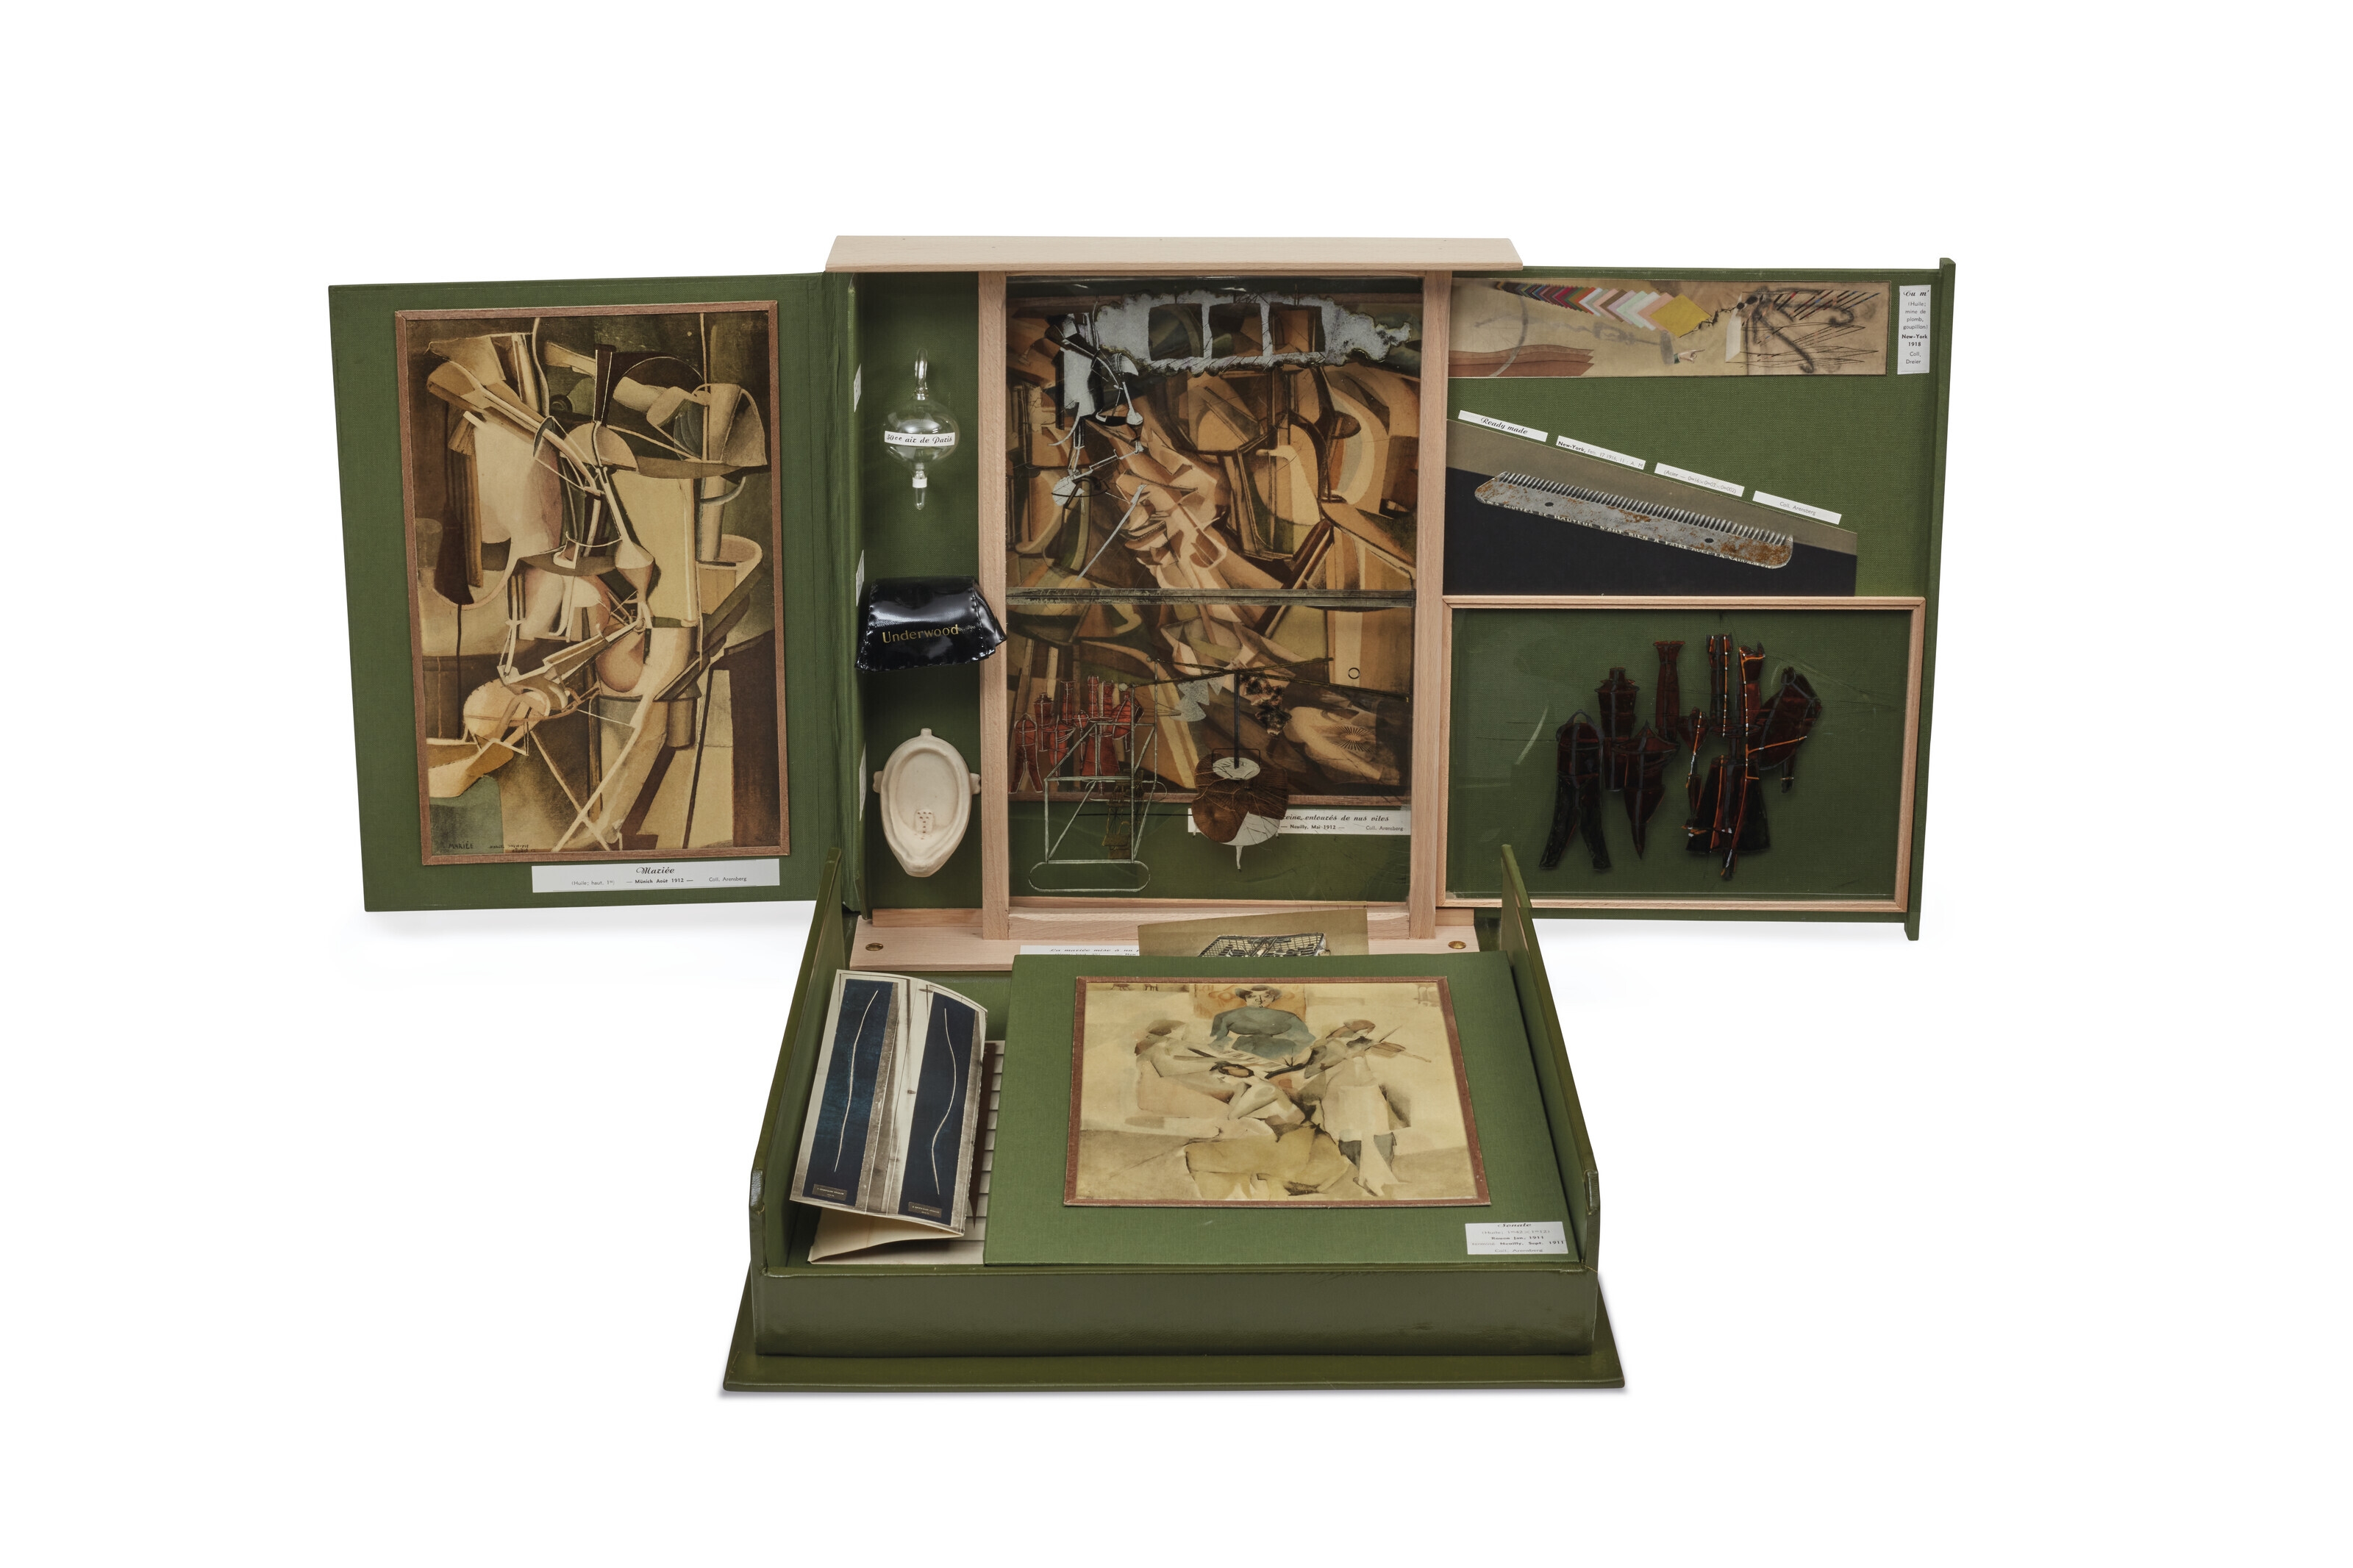 Artwork by Marcel Duchamp, De ou par Marcel Duchamp ou Rrose Sélavy (La Boîte-en-valise), series G, Made of green leather covered wooden and cardboard box with green linen lining, containing 80 miniature replicas and reproductions